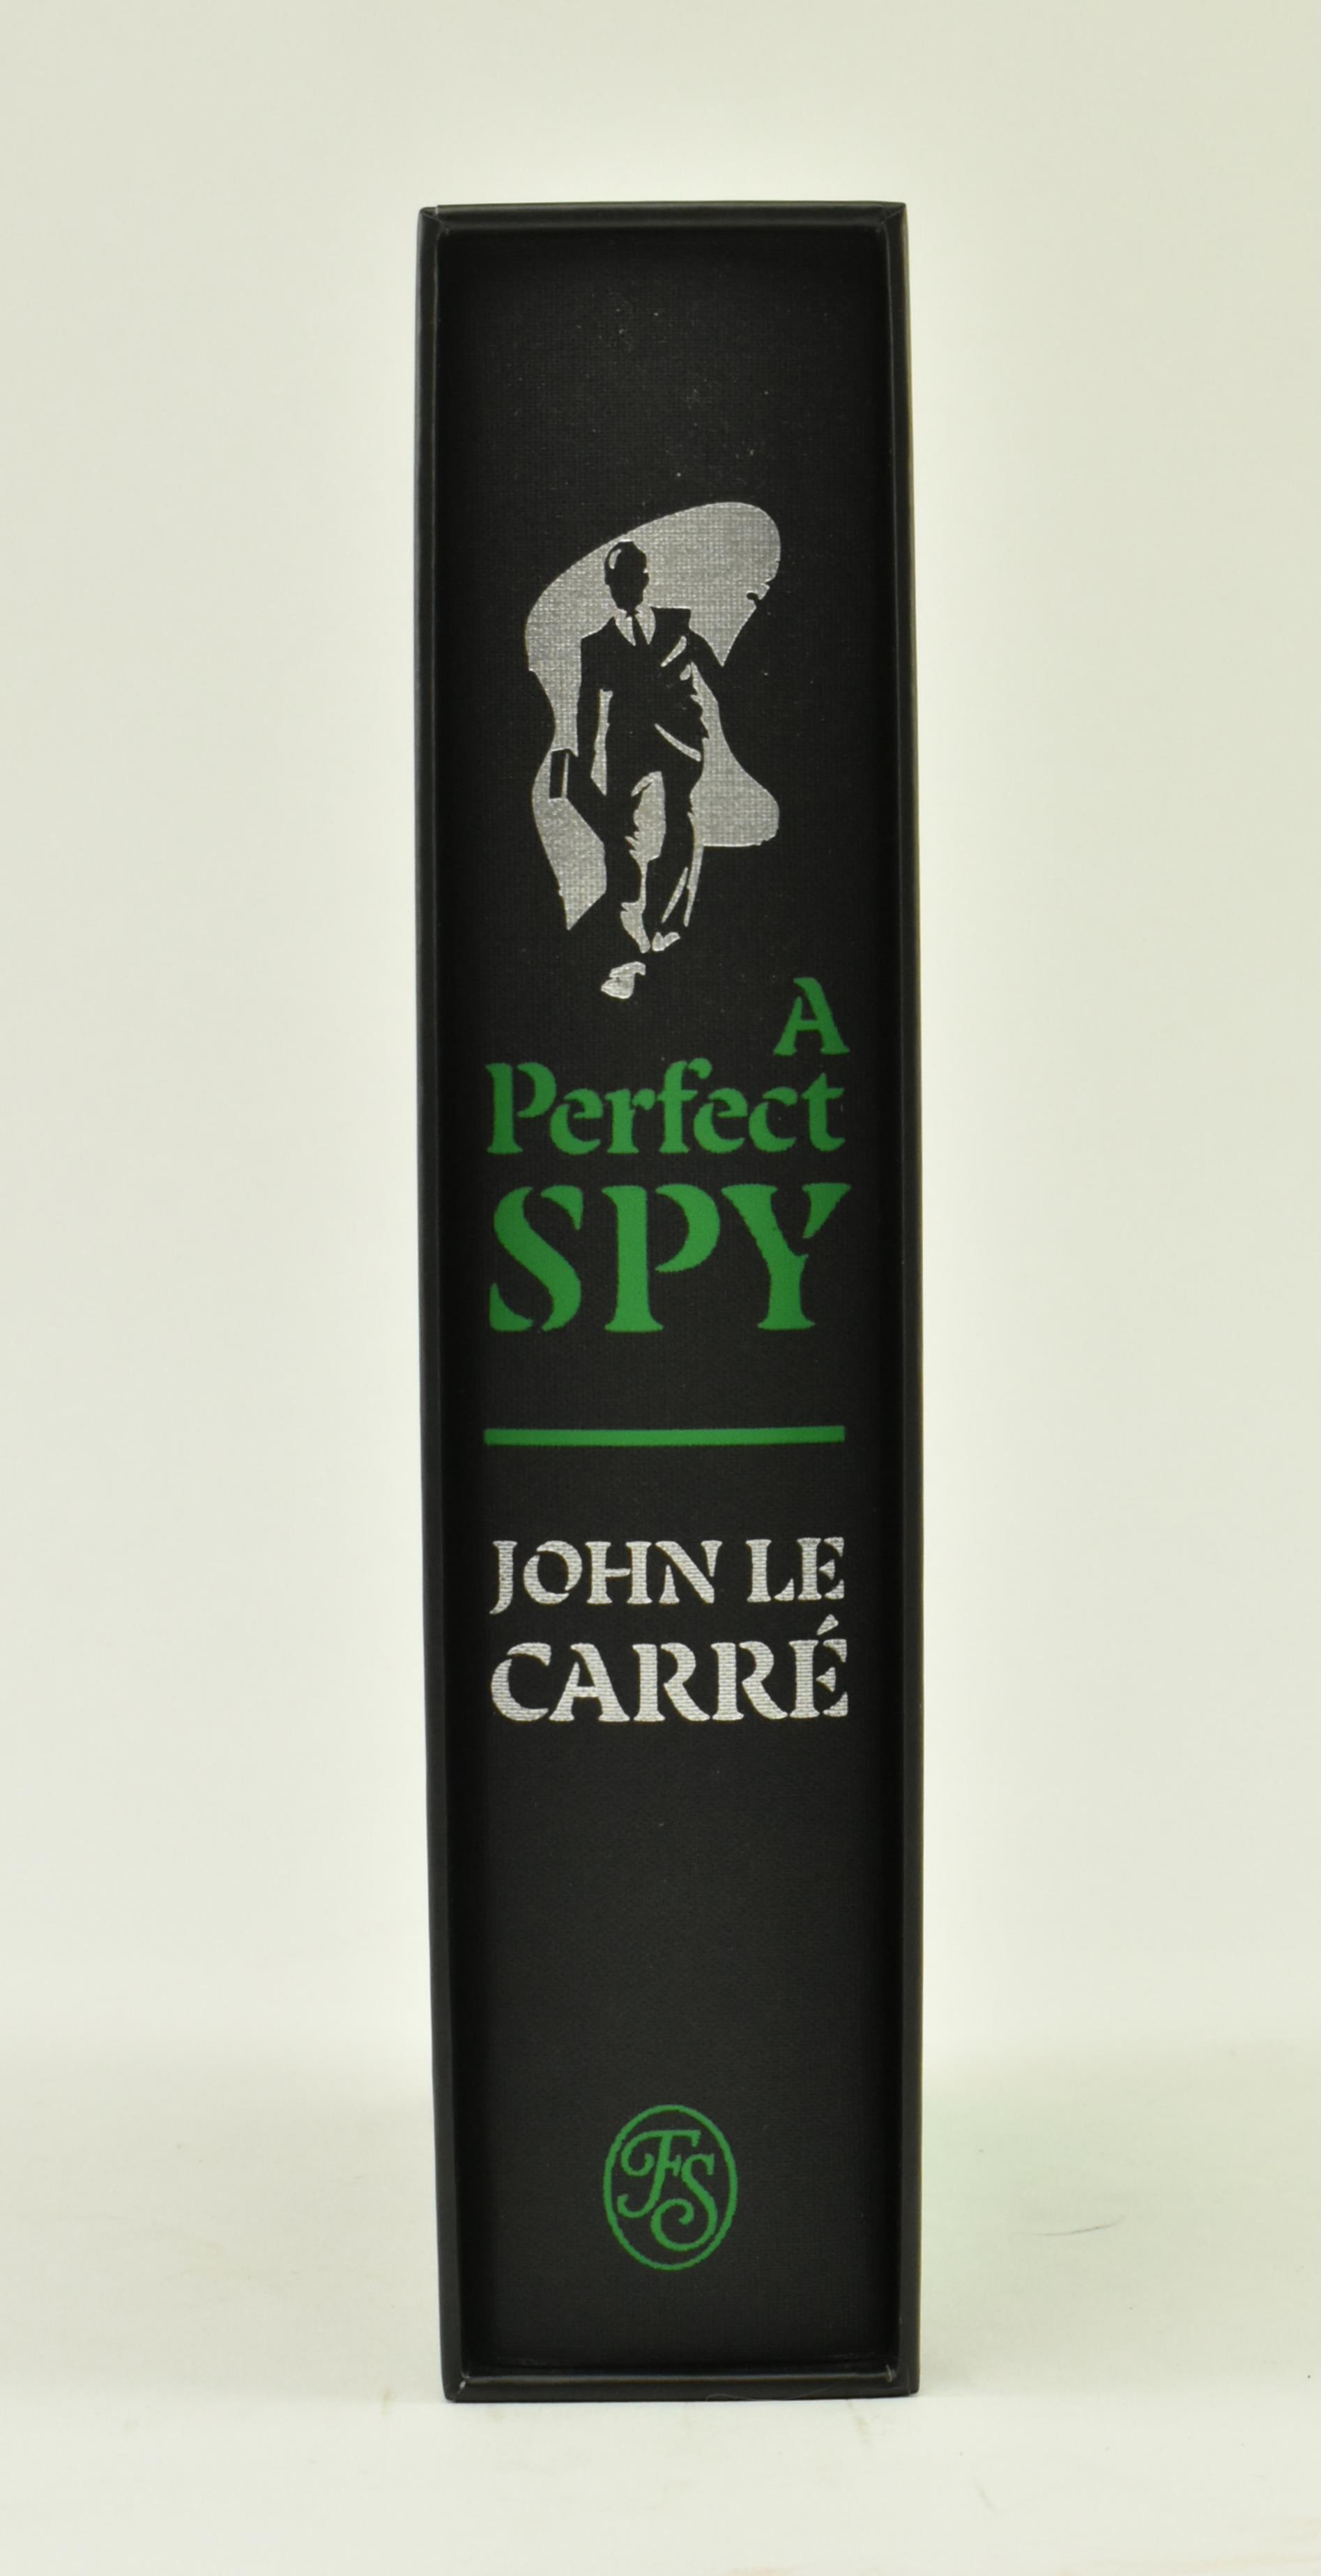 FOLIO SOCIETY. JOHN LE CARRE - A PERFECT SPY, FIRST PRINTING - Image 2 of 7